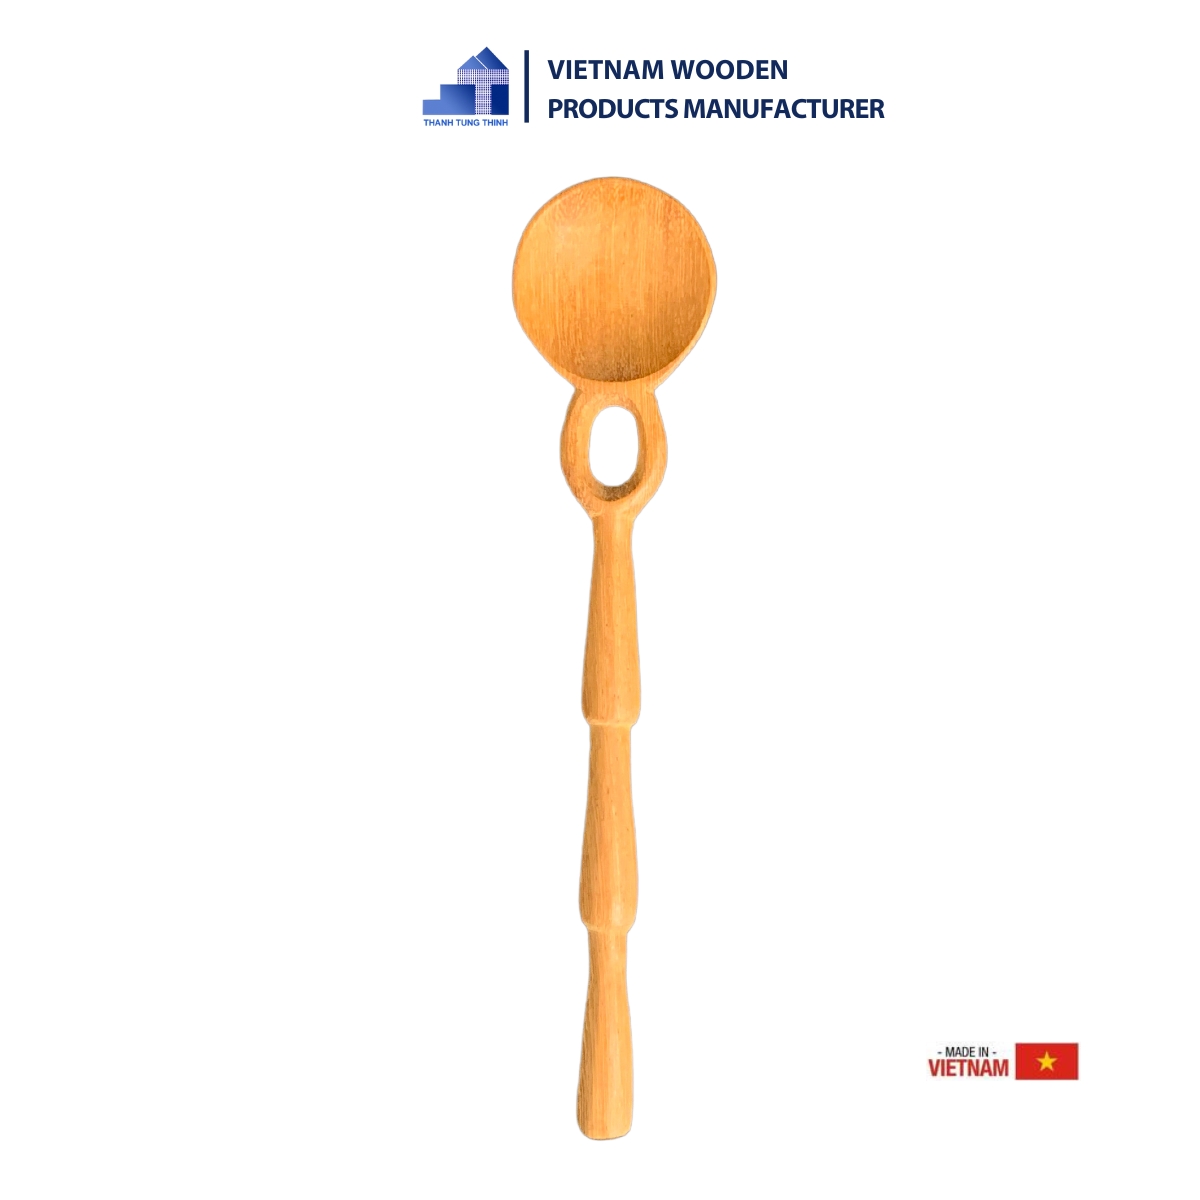 A bamboo tree-inspired design on the wooden spoon product.